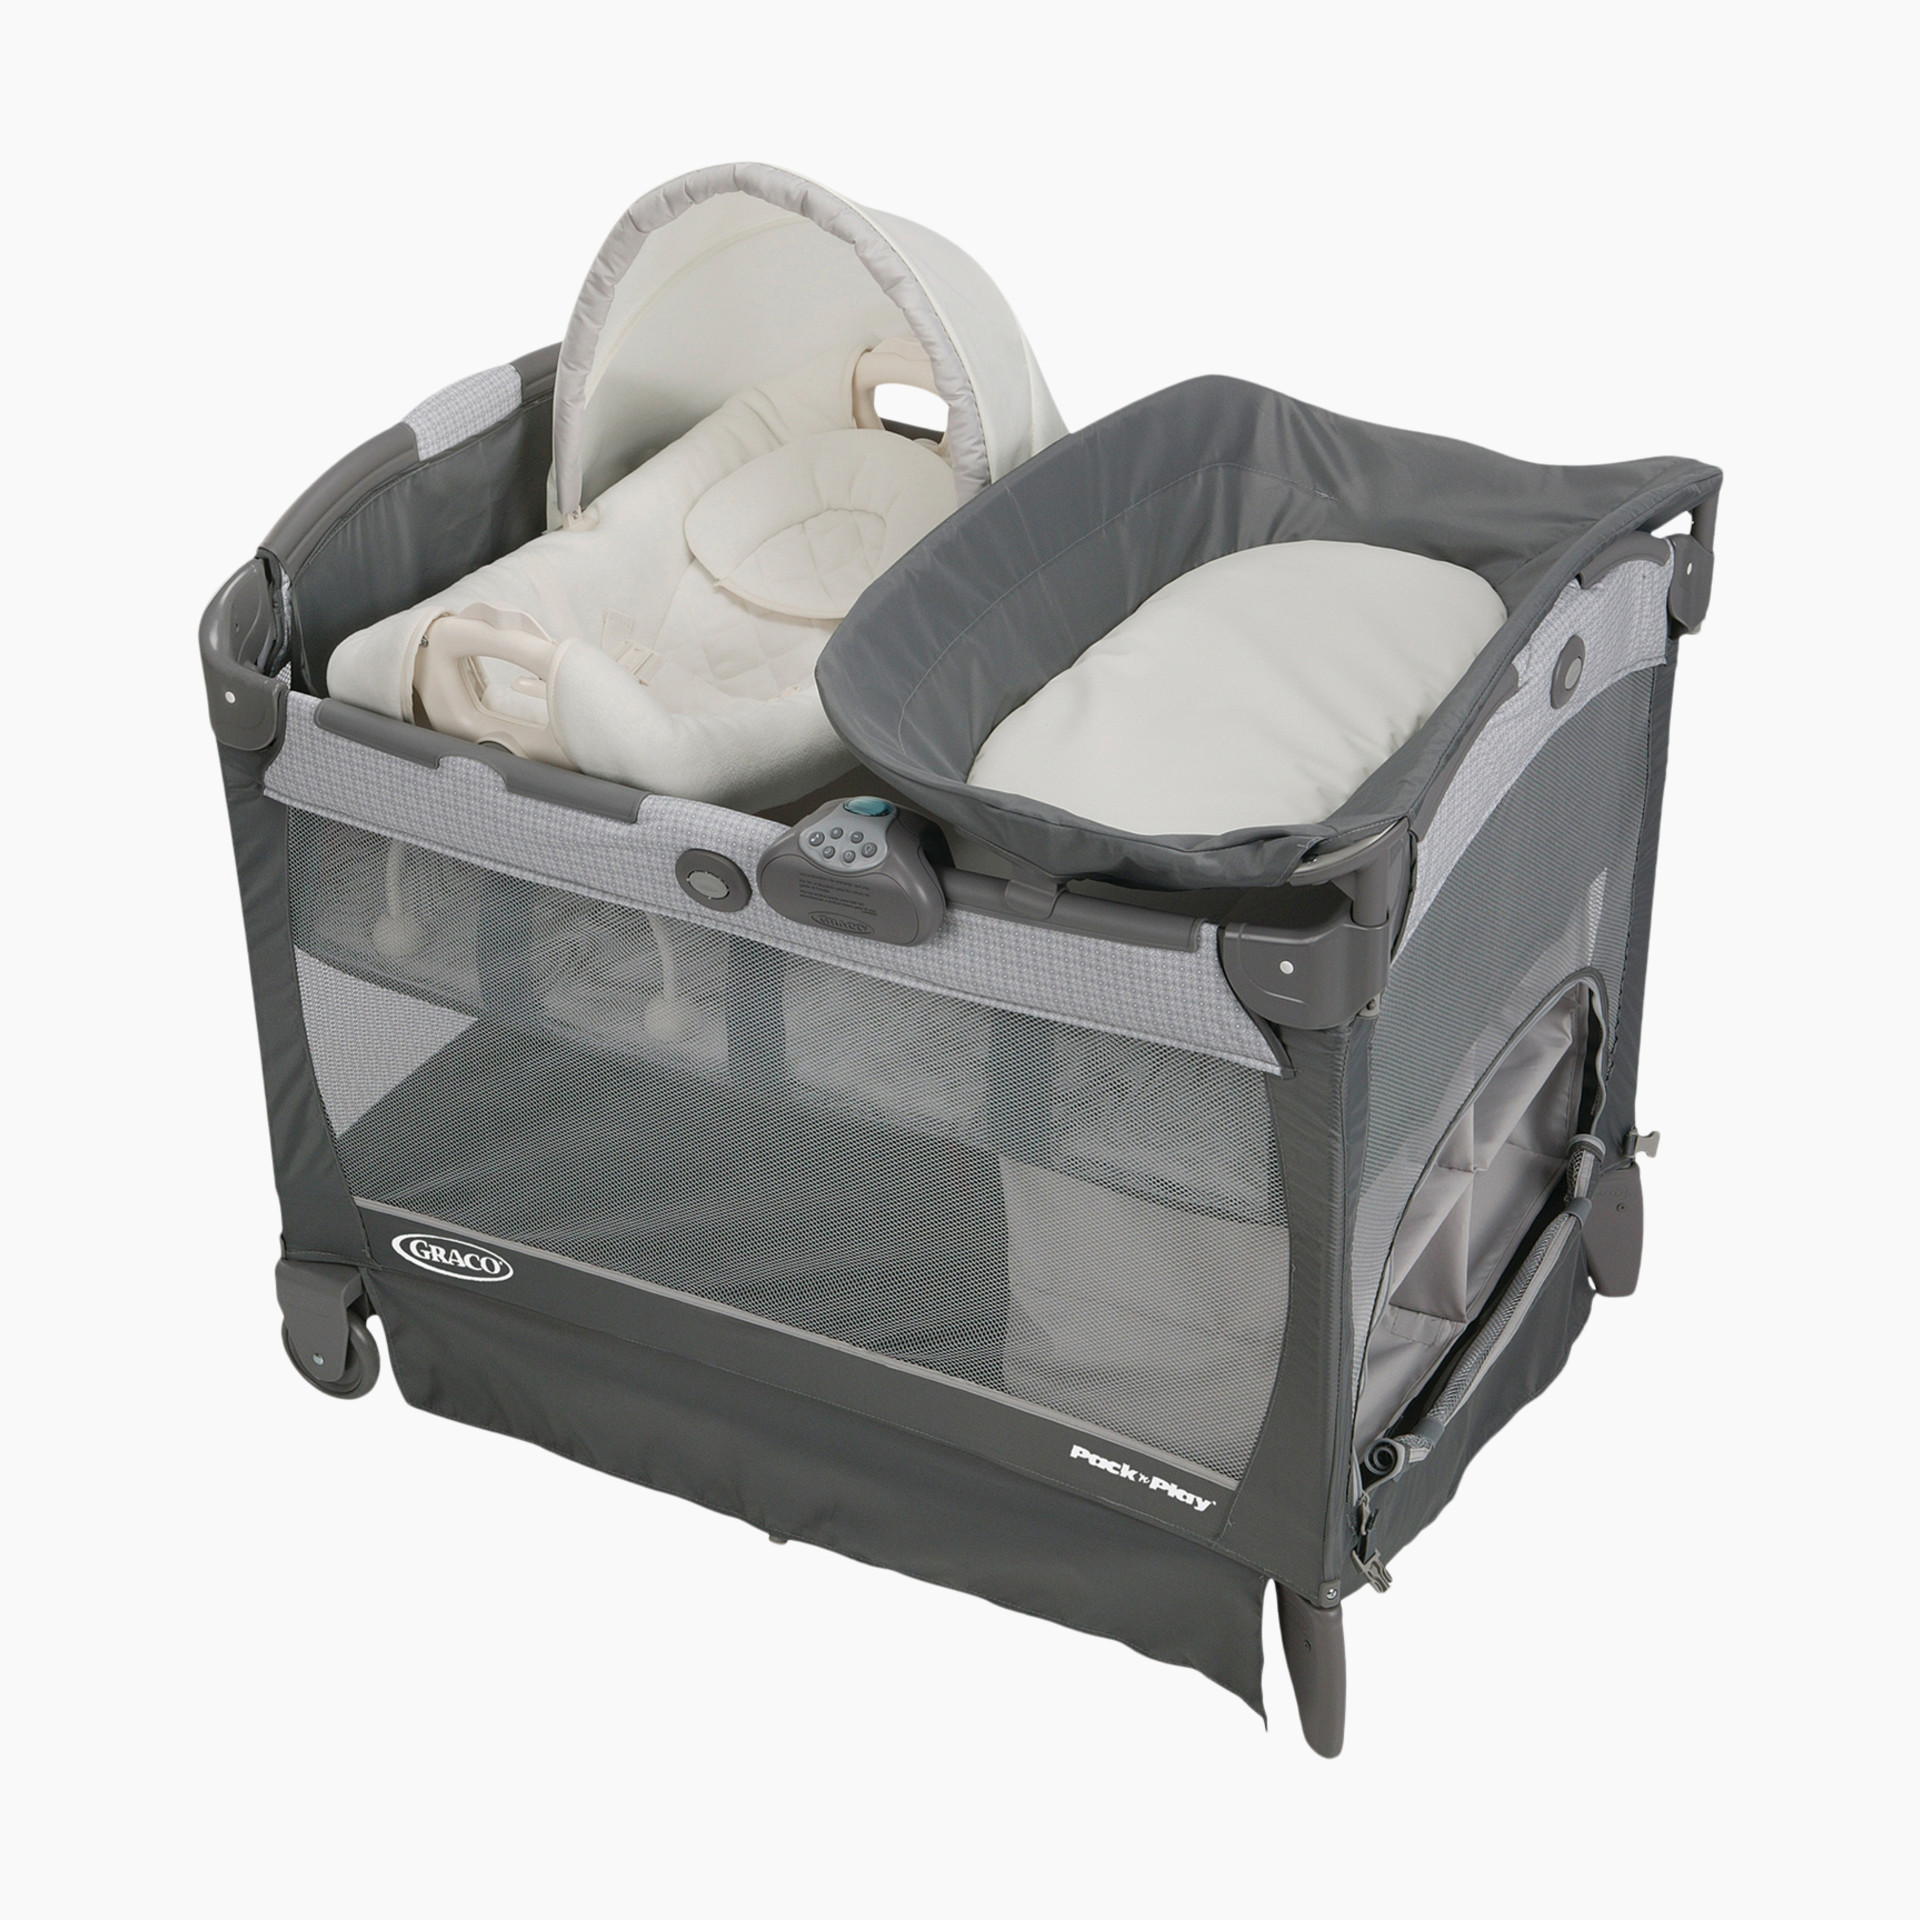 Graco Pack N Play Playard With Cuddle Cove Removable Seat Babylist Store